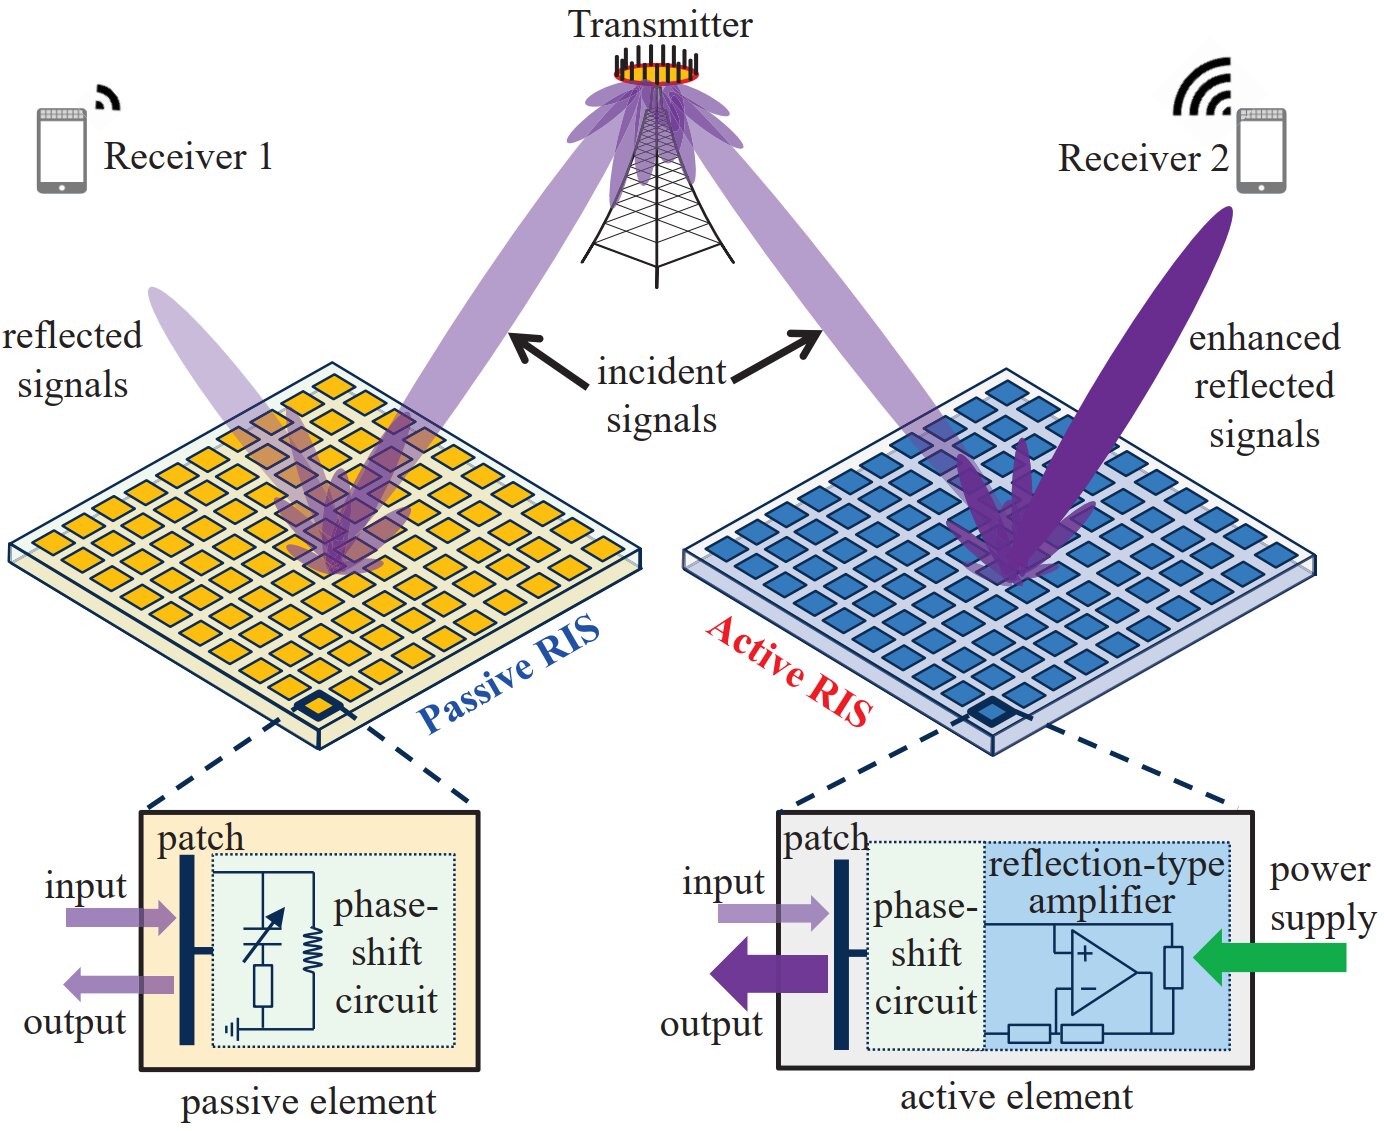 Reconfigurable intelligent surfaces for 6G: Nine fundamental issues and one critical problem